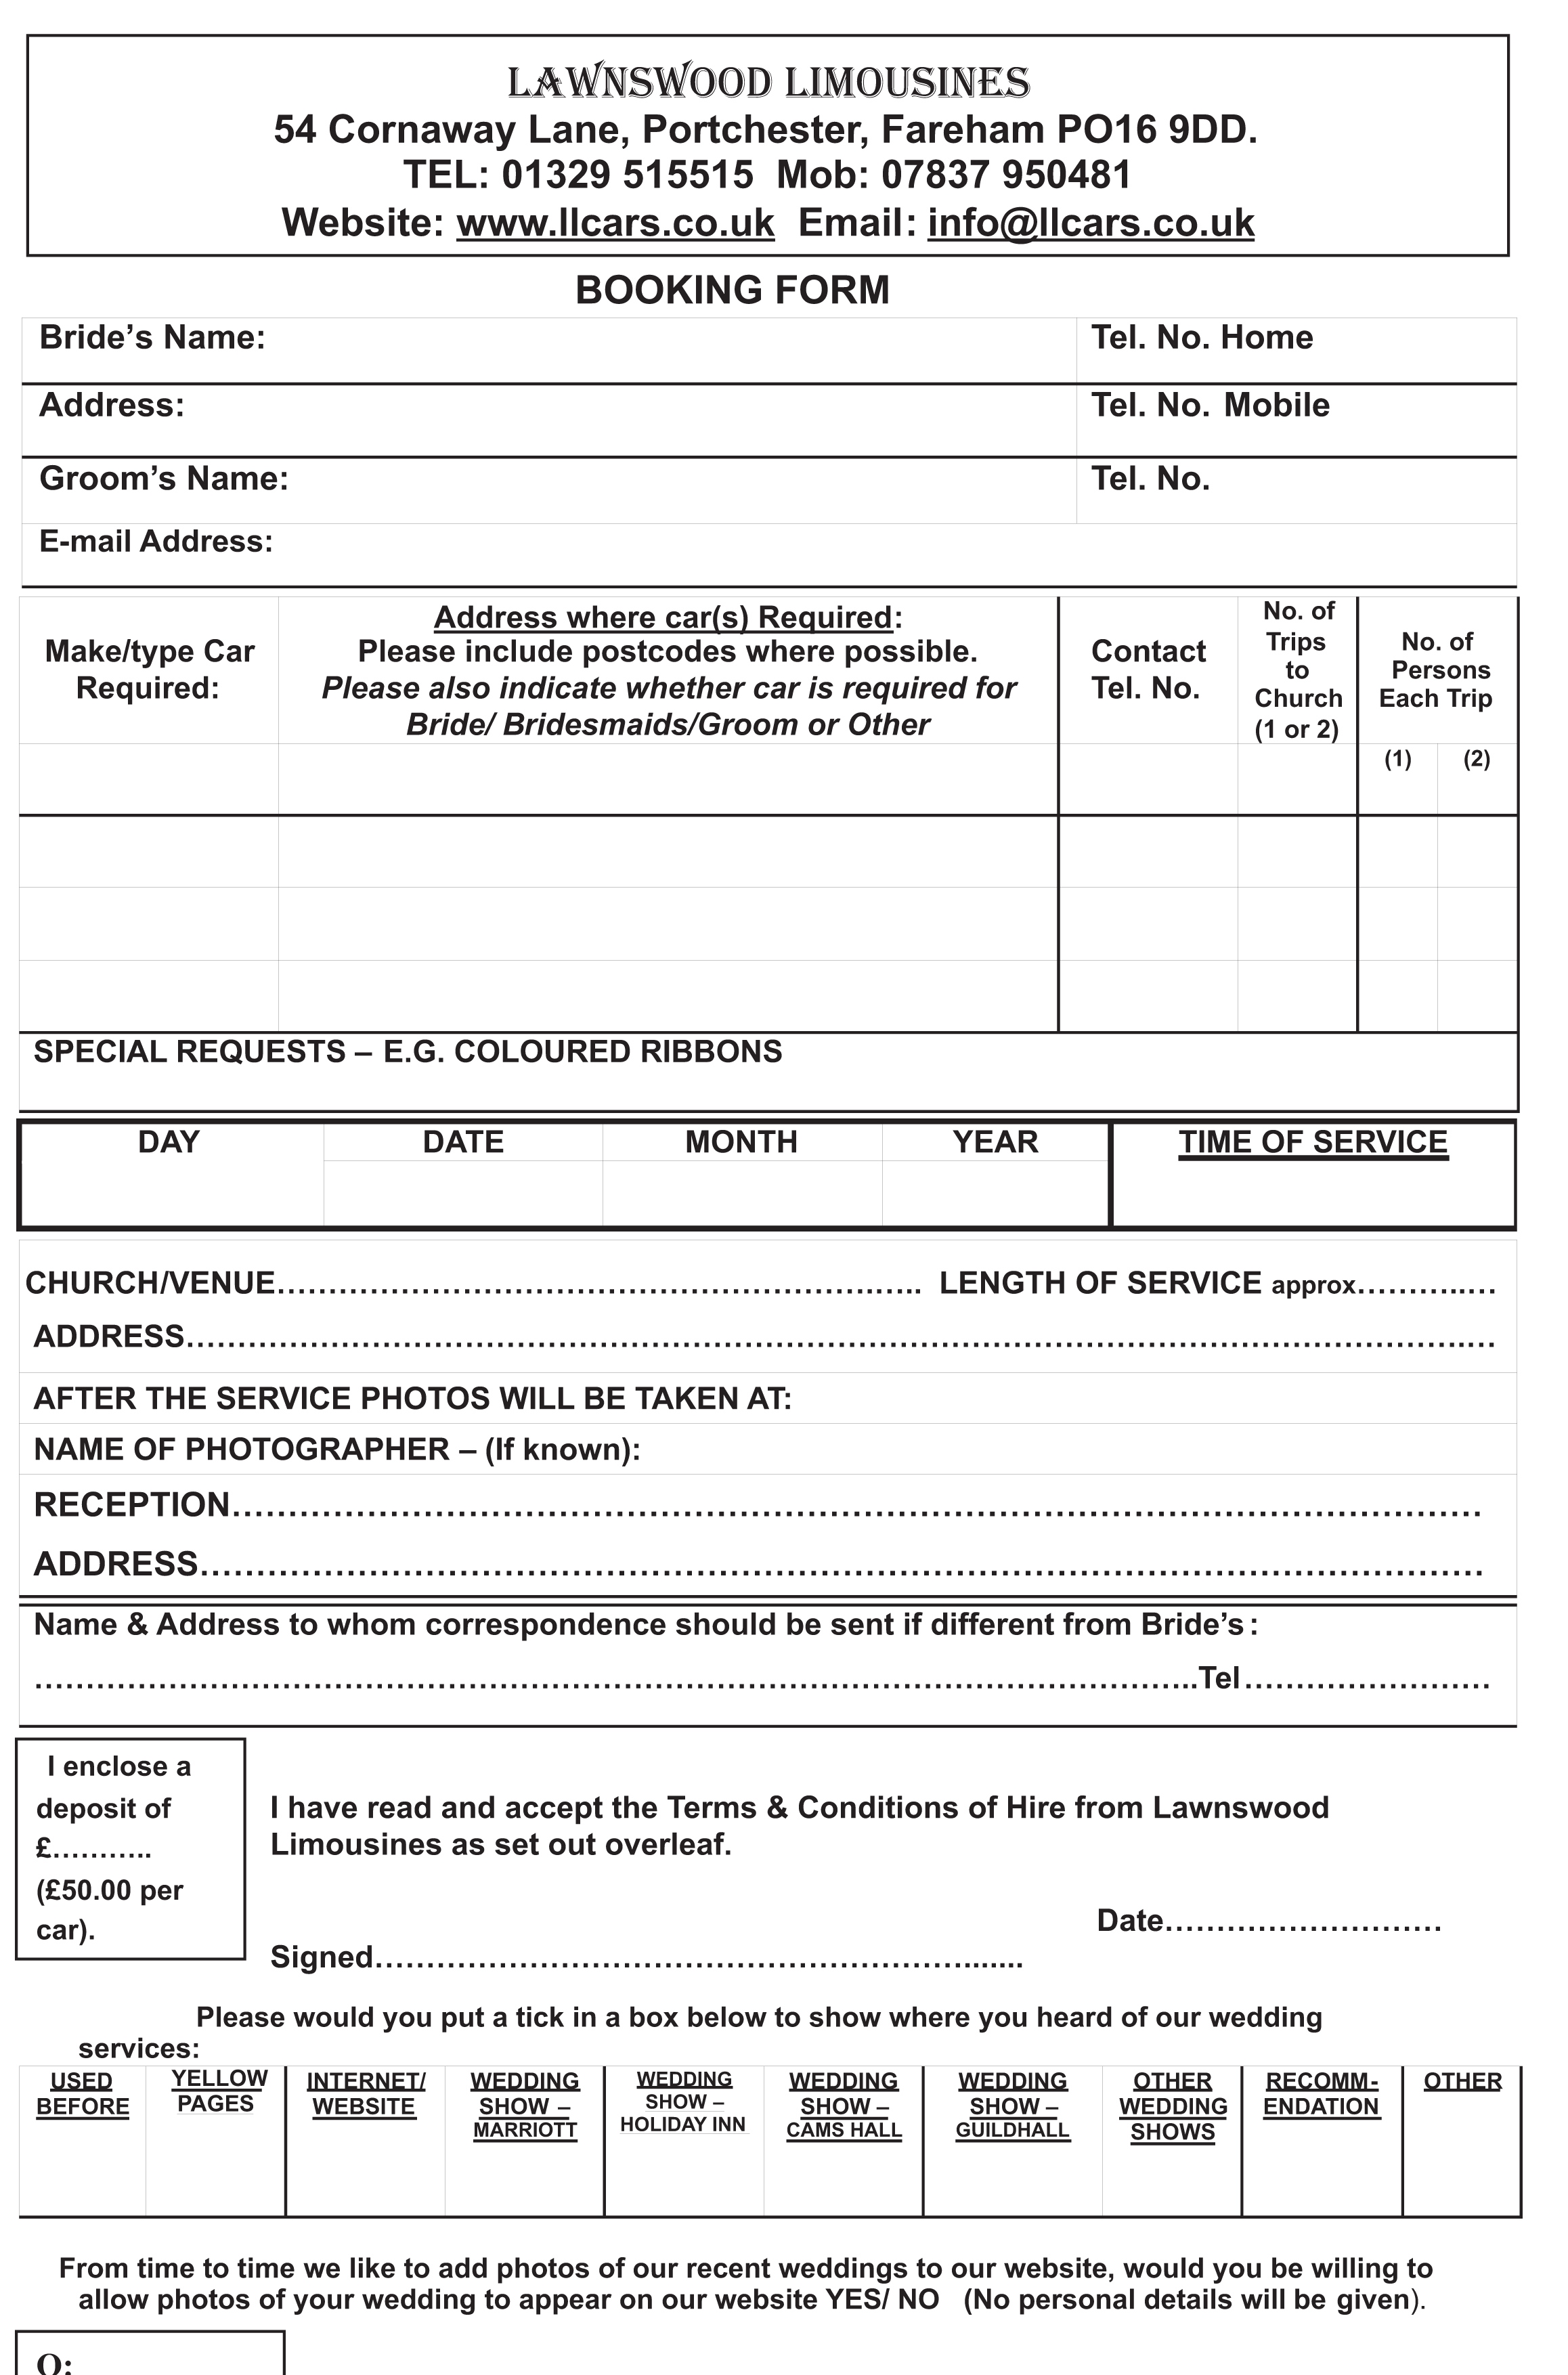 Lawnswood Limousines Booking Form